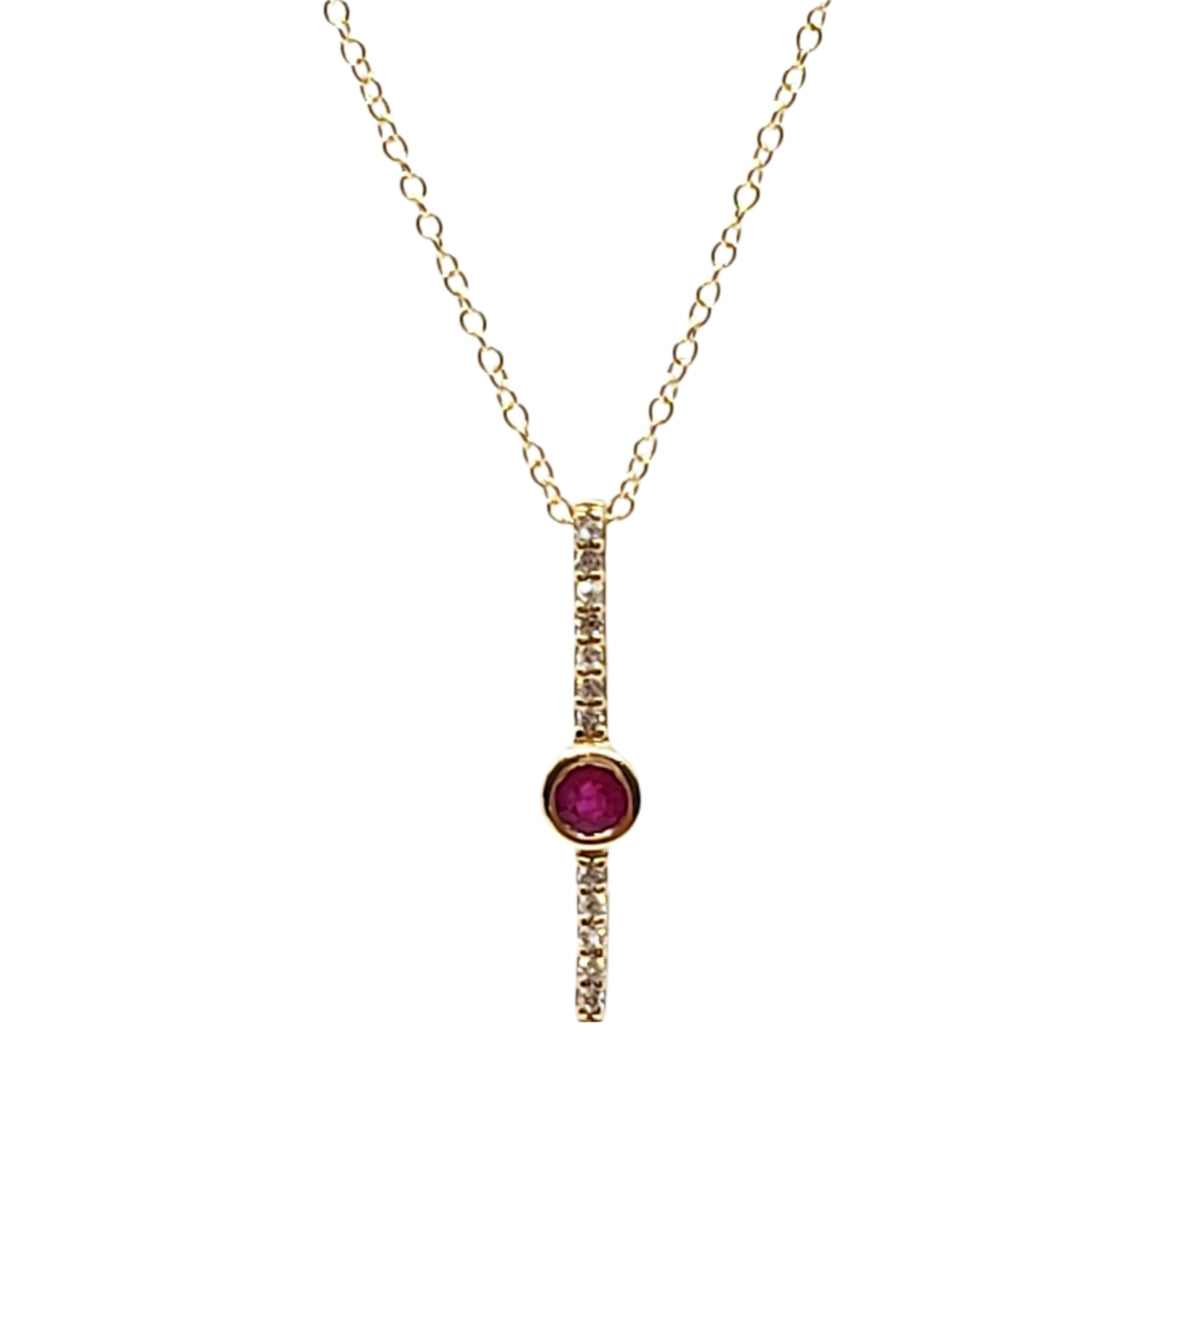 10K Yellow Gold 0.08cttw (2.5mm) Ruby and 0.05cttw Diamond Necklace with Cable Chain (Spring Clasp) - Adjustable 17 - 18 Inches